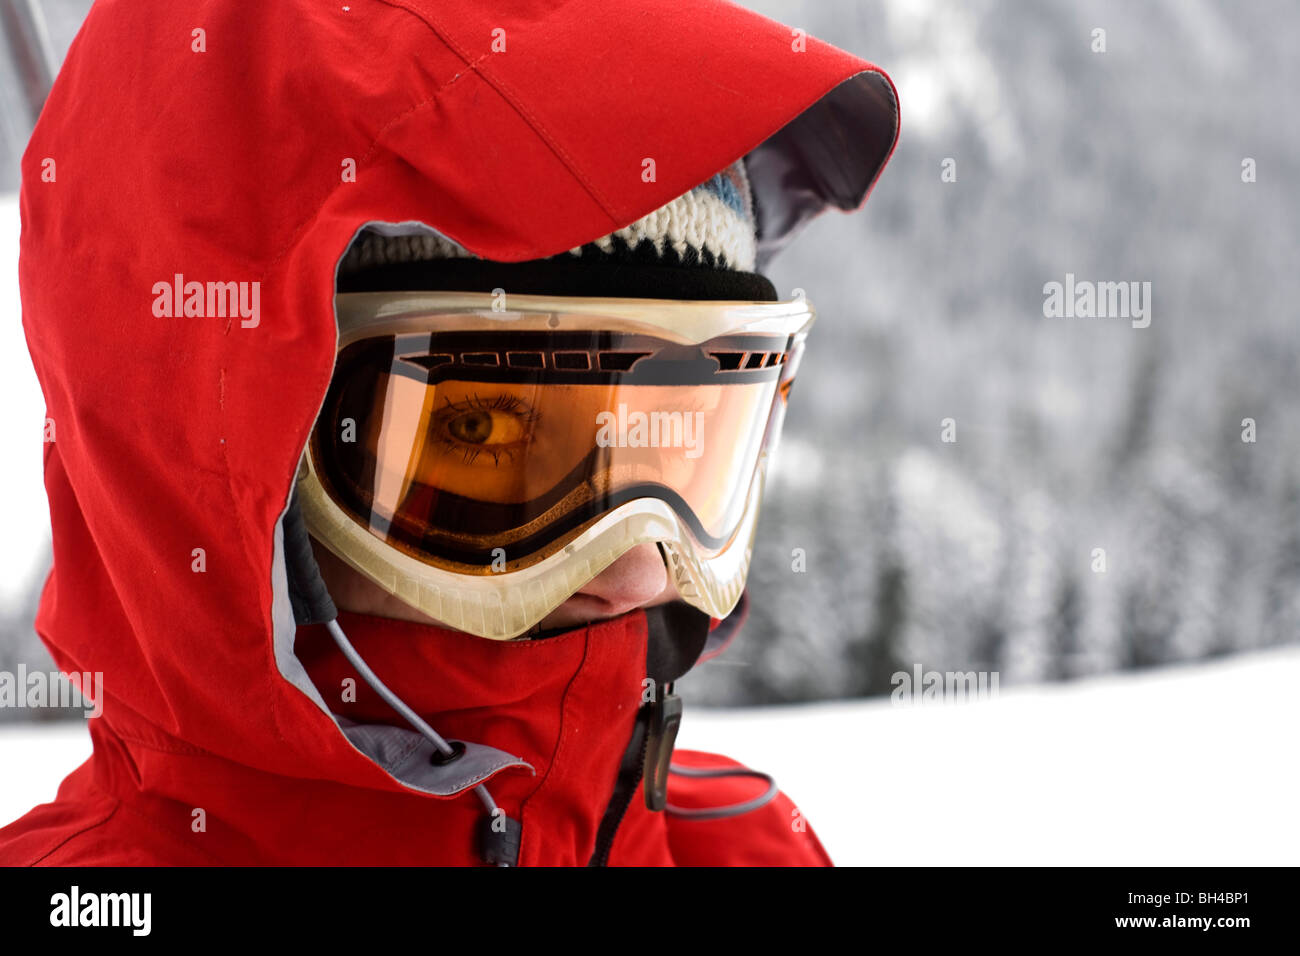 A close-up portrait of a woman wearing a red ski coat, goggles and ski cap looking directly into camera with just her nose and e Stock Photo